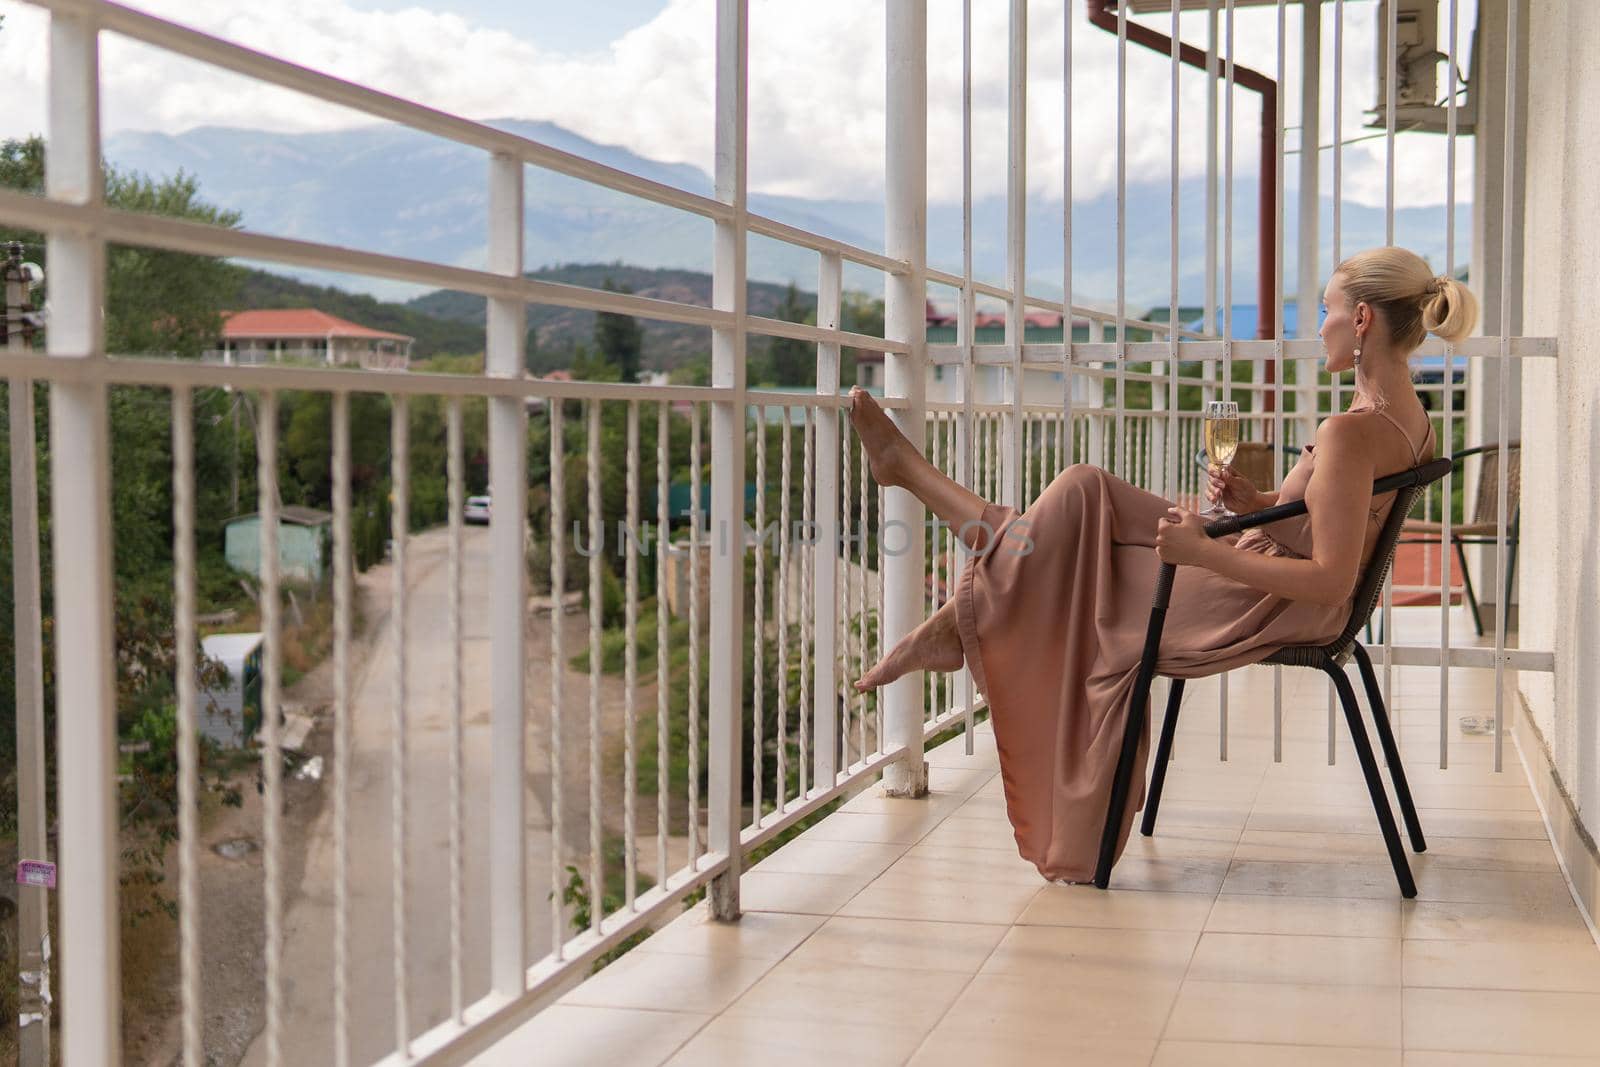 The girl sits on the balcony of the mountains and the blue sky on the background of beauty balcony female, outdoor relax view enjoy, leisure travel. Inspiration sky romantic hotel